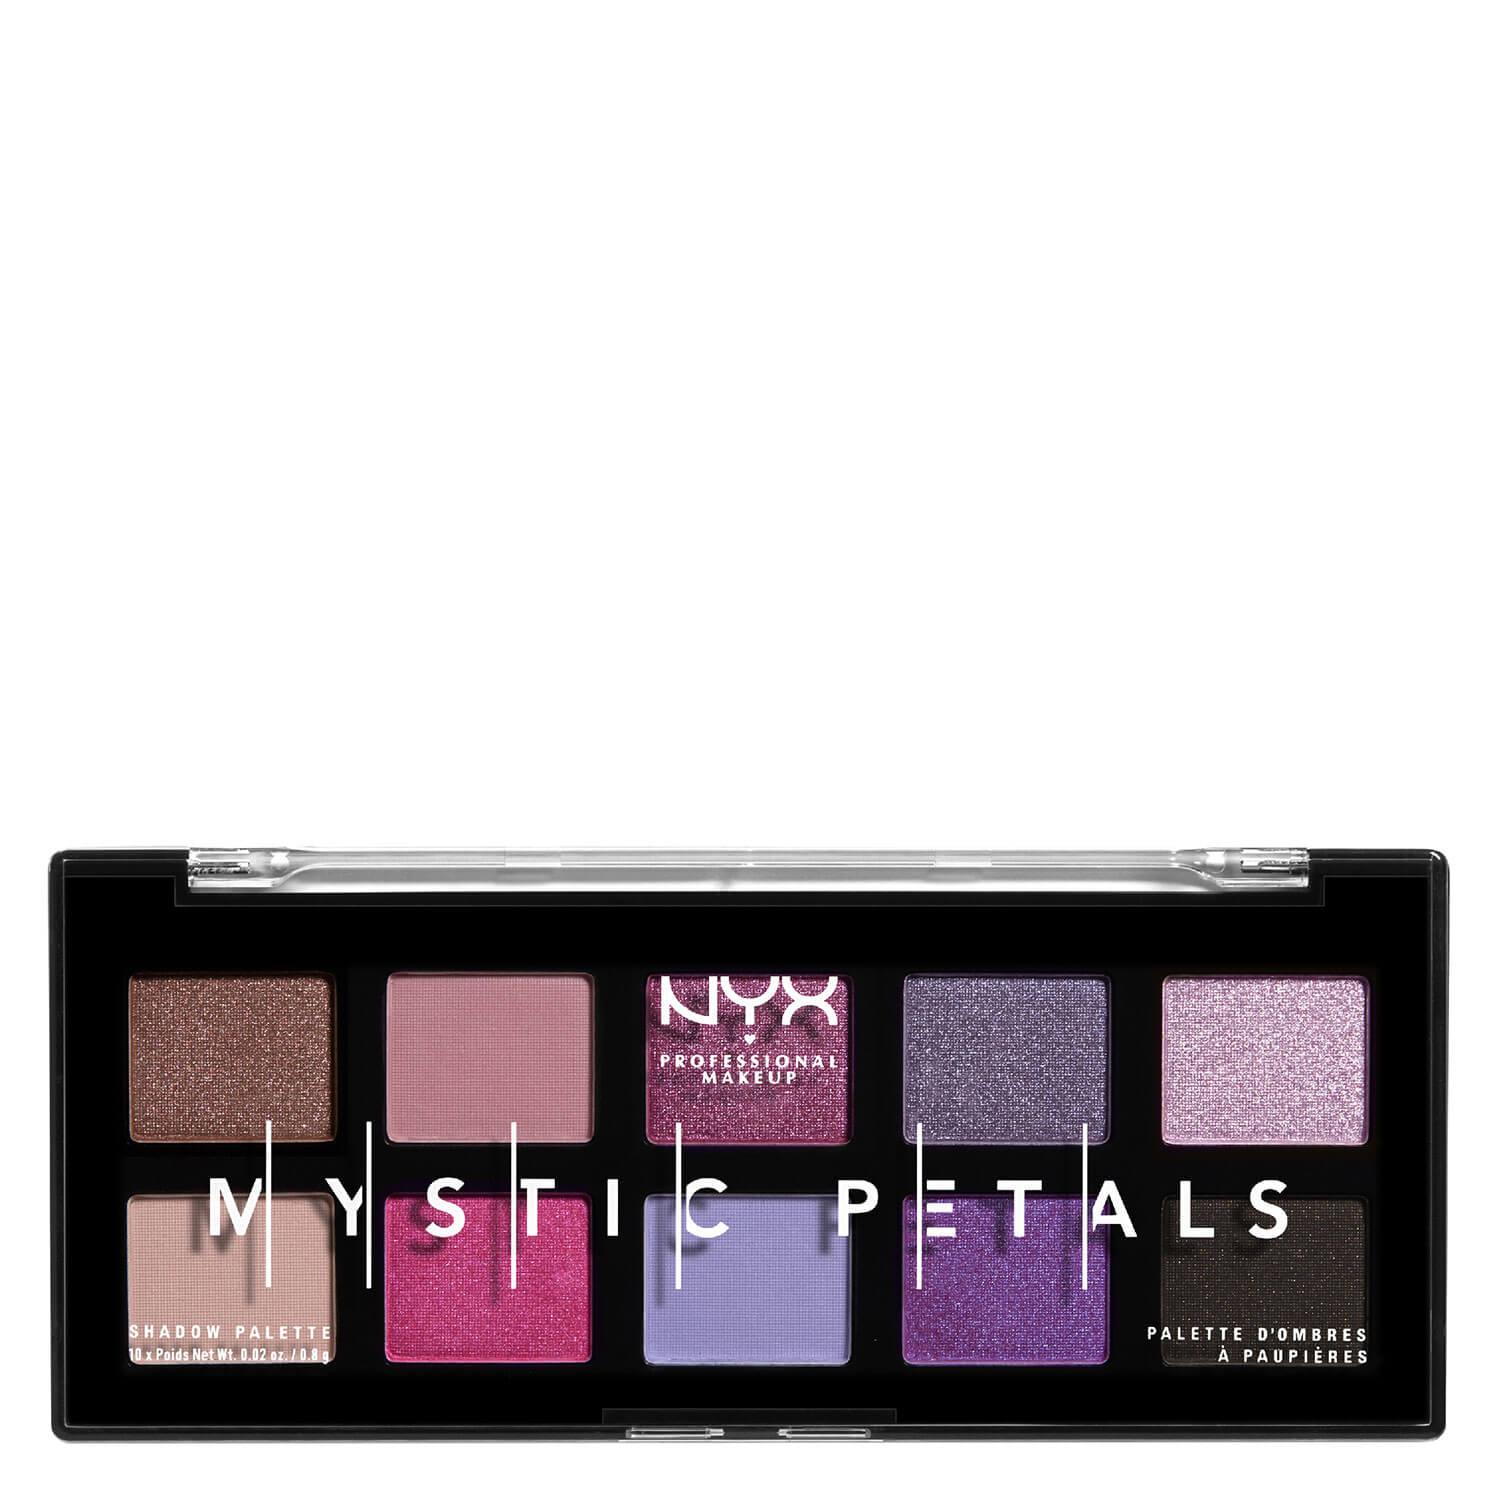 NYX Palette - Mystic Petals Shadow Palette Midnight Orchid